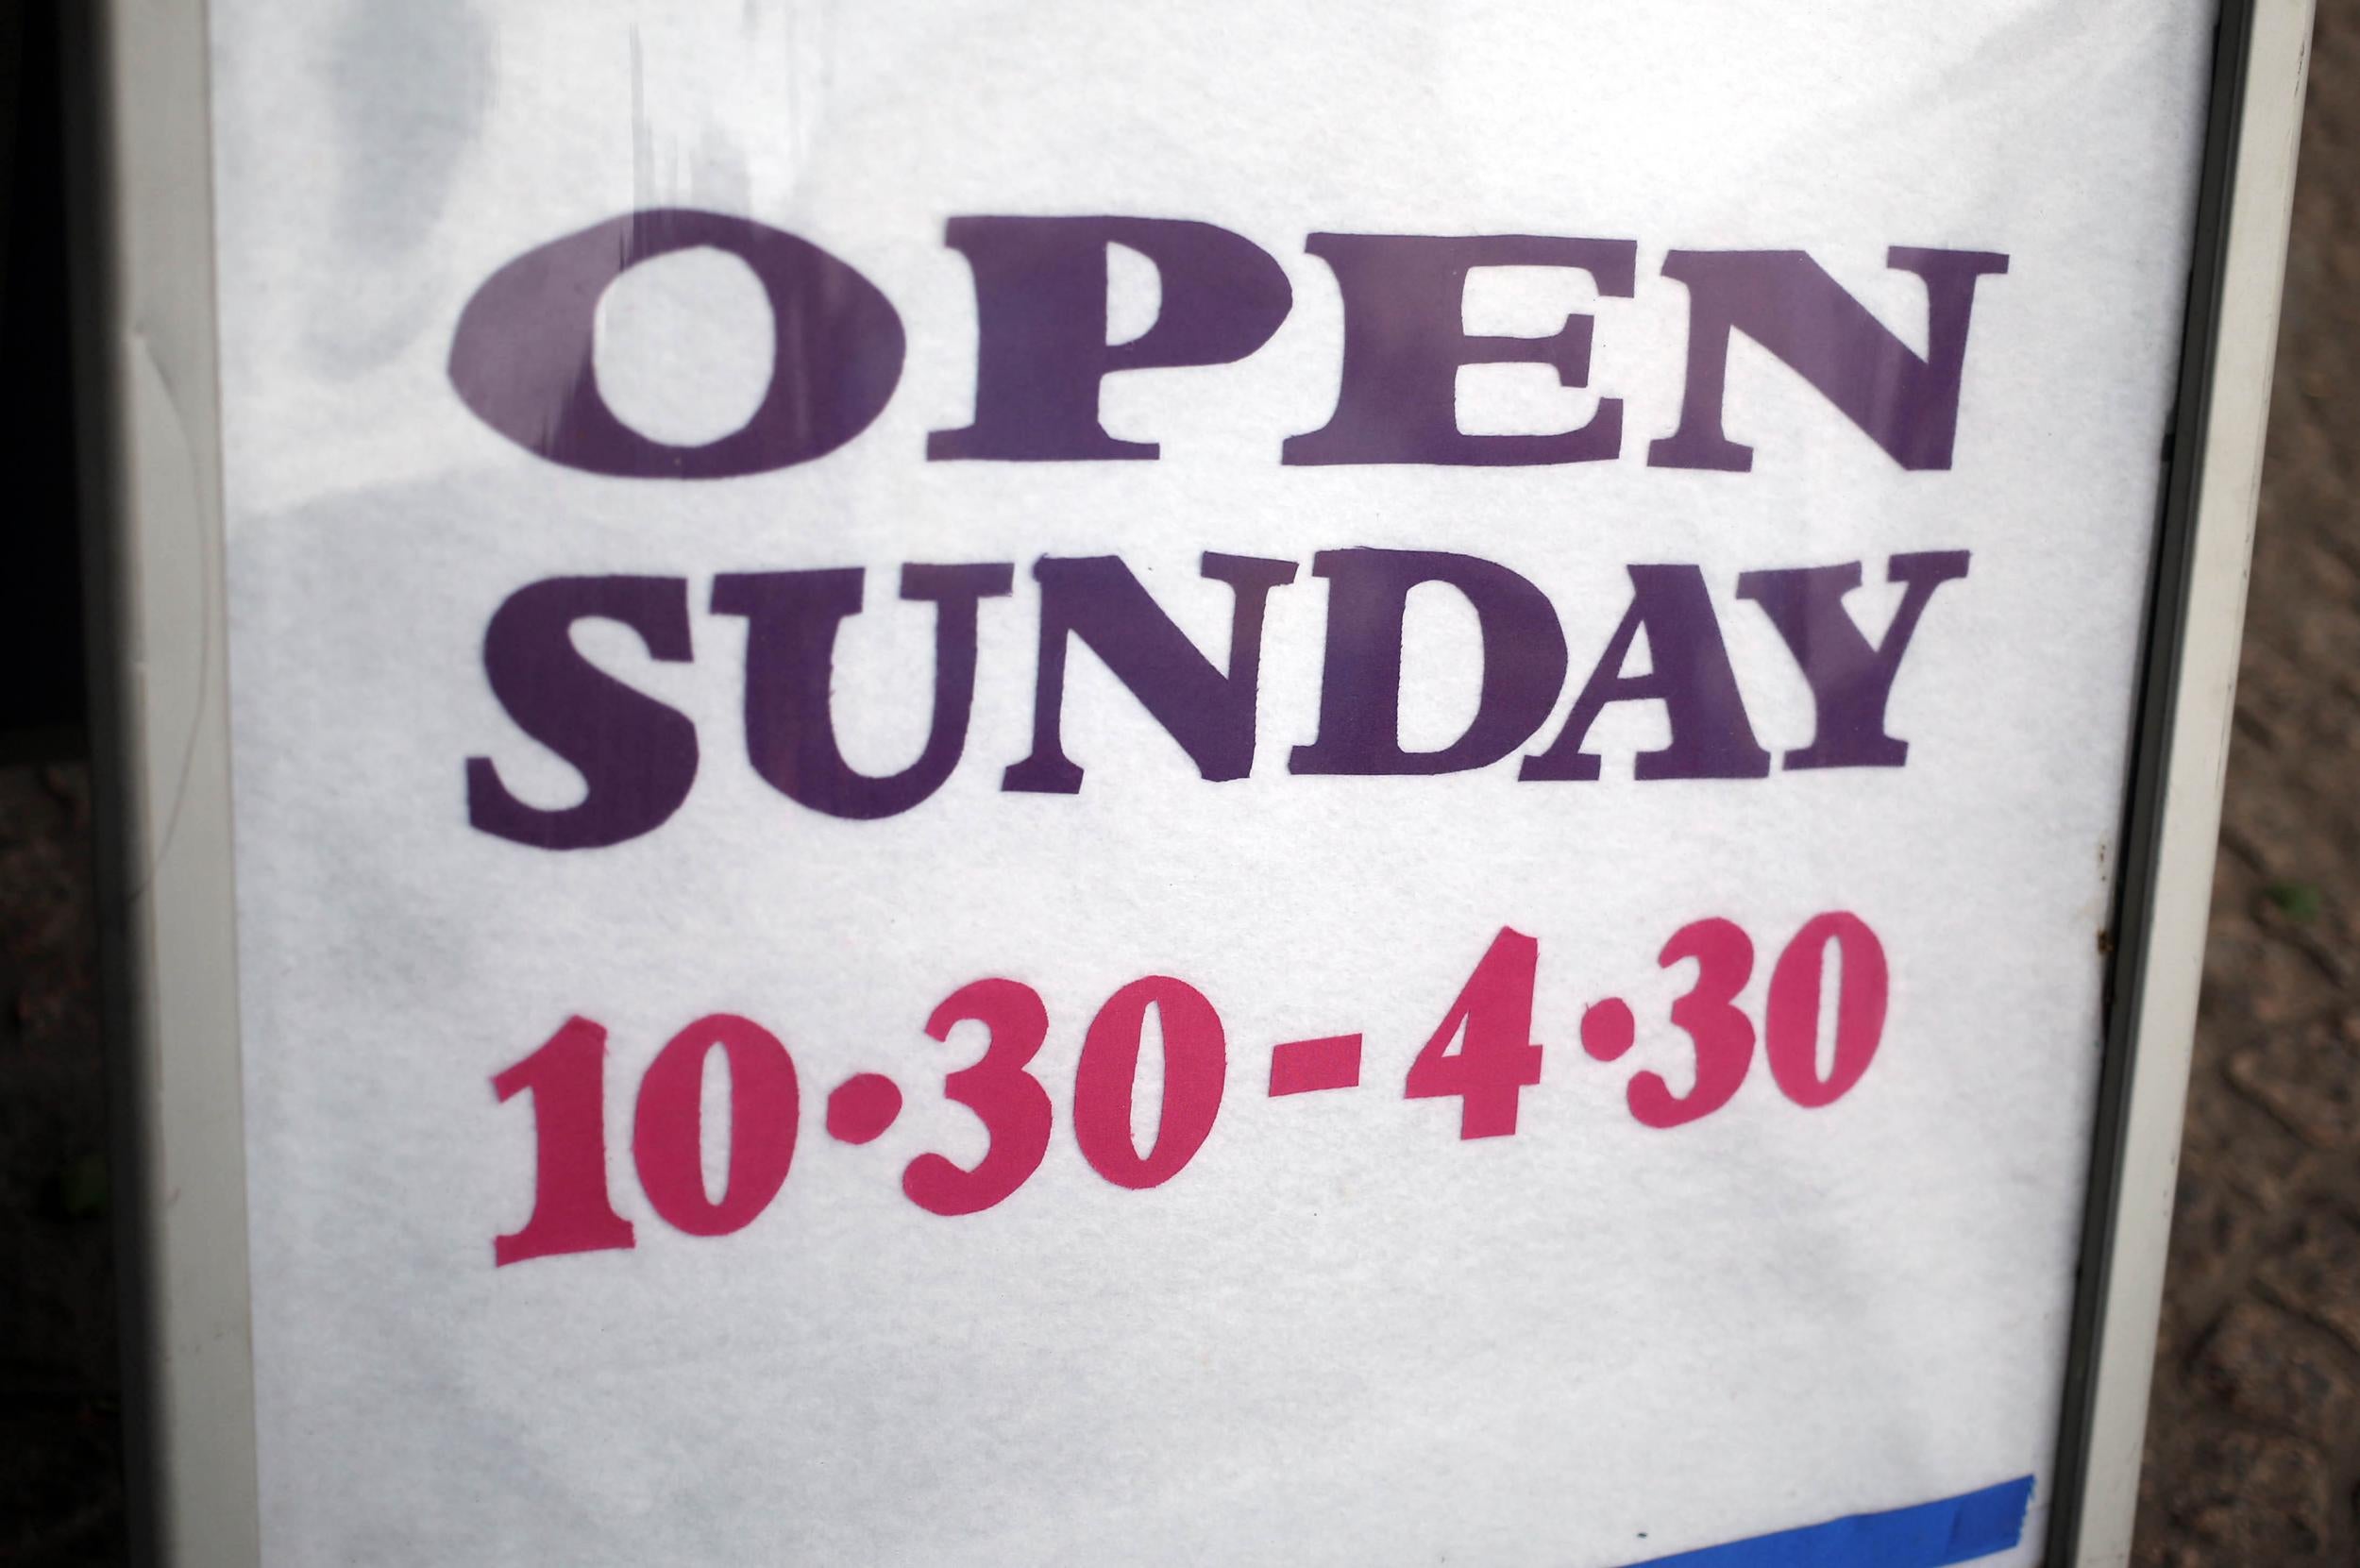 Ministers want to extend Sunday opening hours for large stores and supermarkets